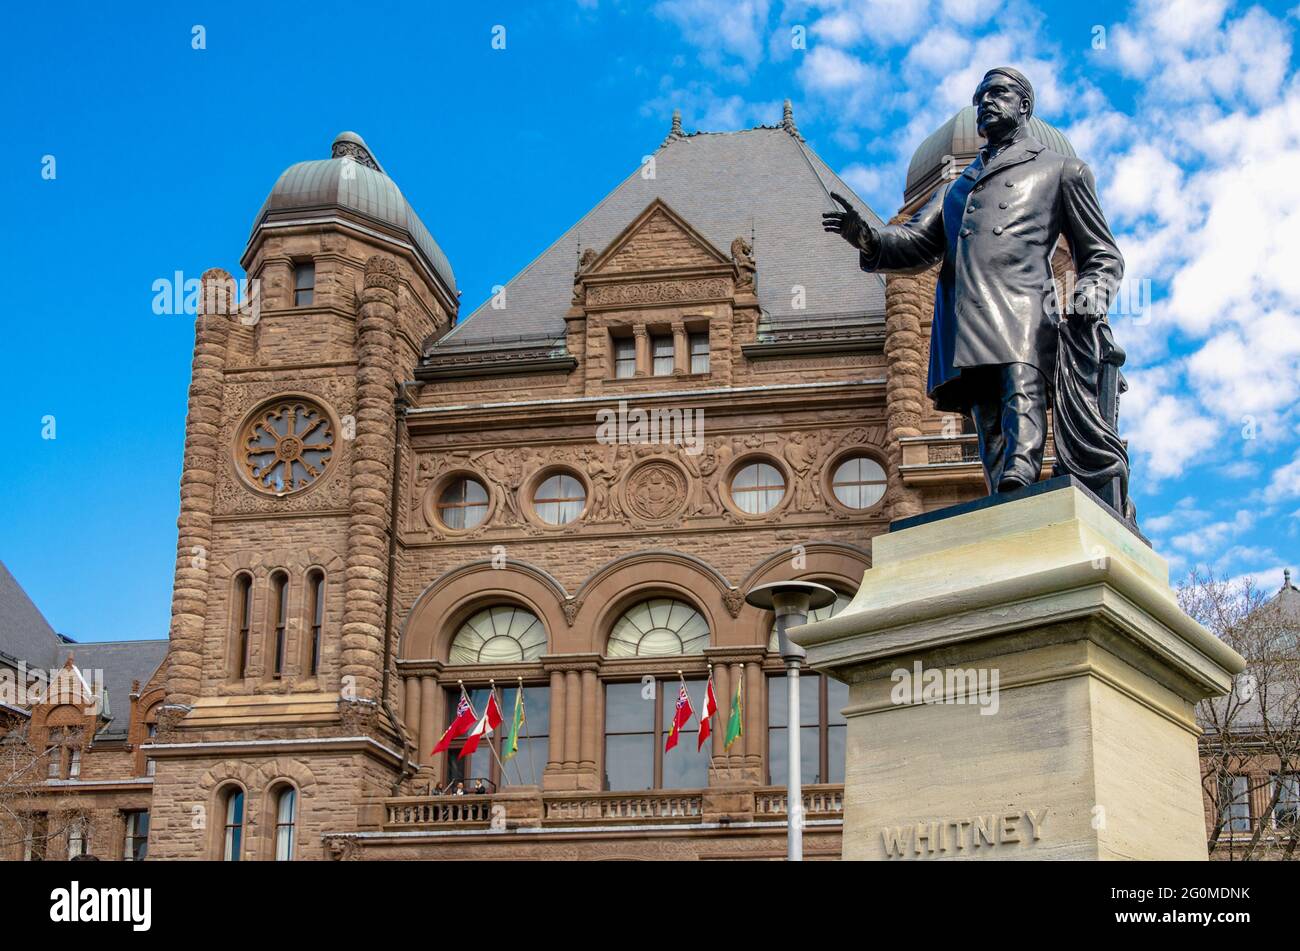 Sir James Pliny Whitney statue at Ontario Legislative Building. Whitney was a lawyer and politician in the Canadian province of Ontario. Stock Photo